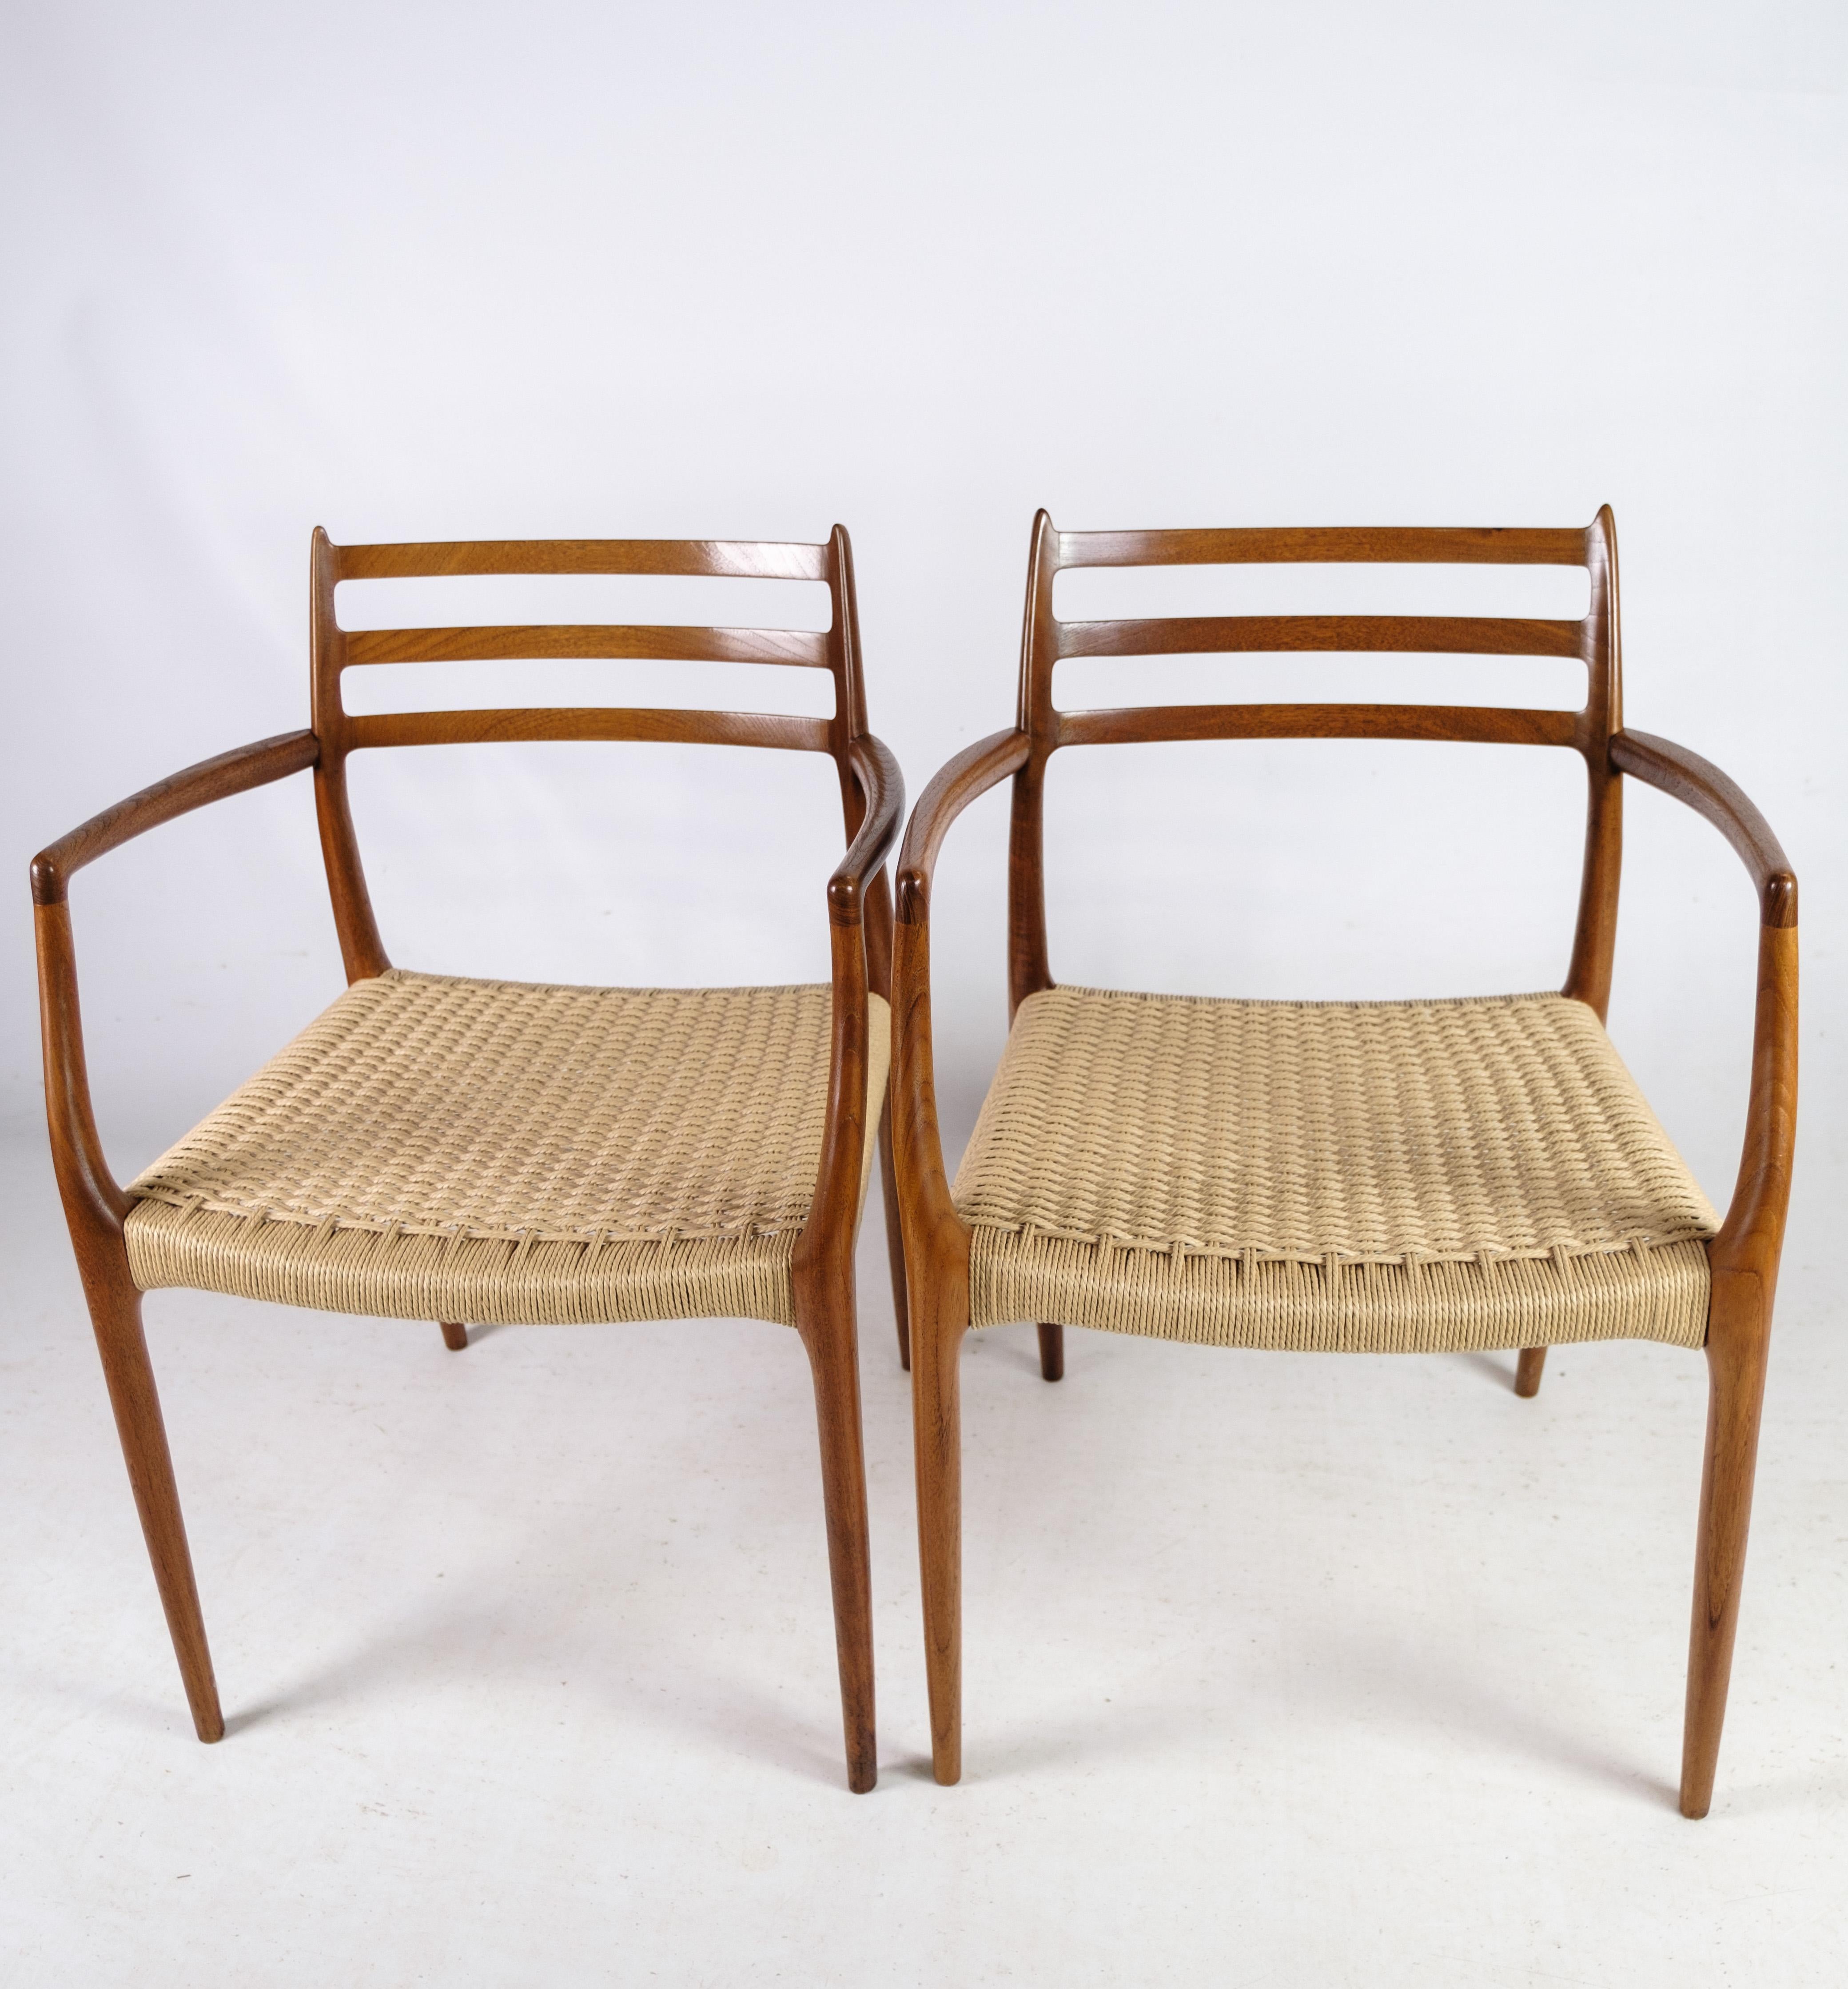 This set of two armchairs, model NO 62, designed by N.O. Møller in 1962, is a rare and exquisite find. Crafted at J.L. Møllers Møbelfabrik, these chairs are a testament to the impeccable craftsmanship and design innovation of the mid-century Danish